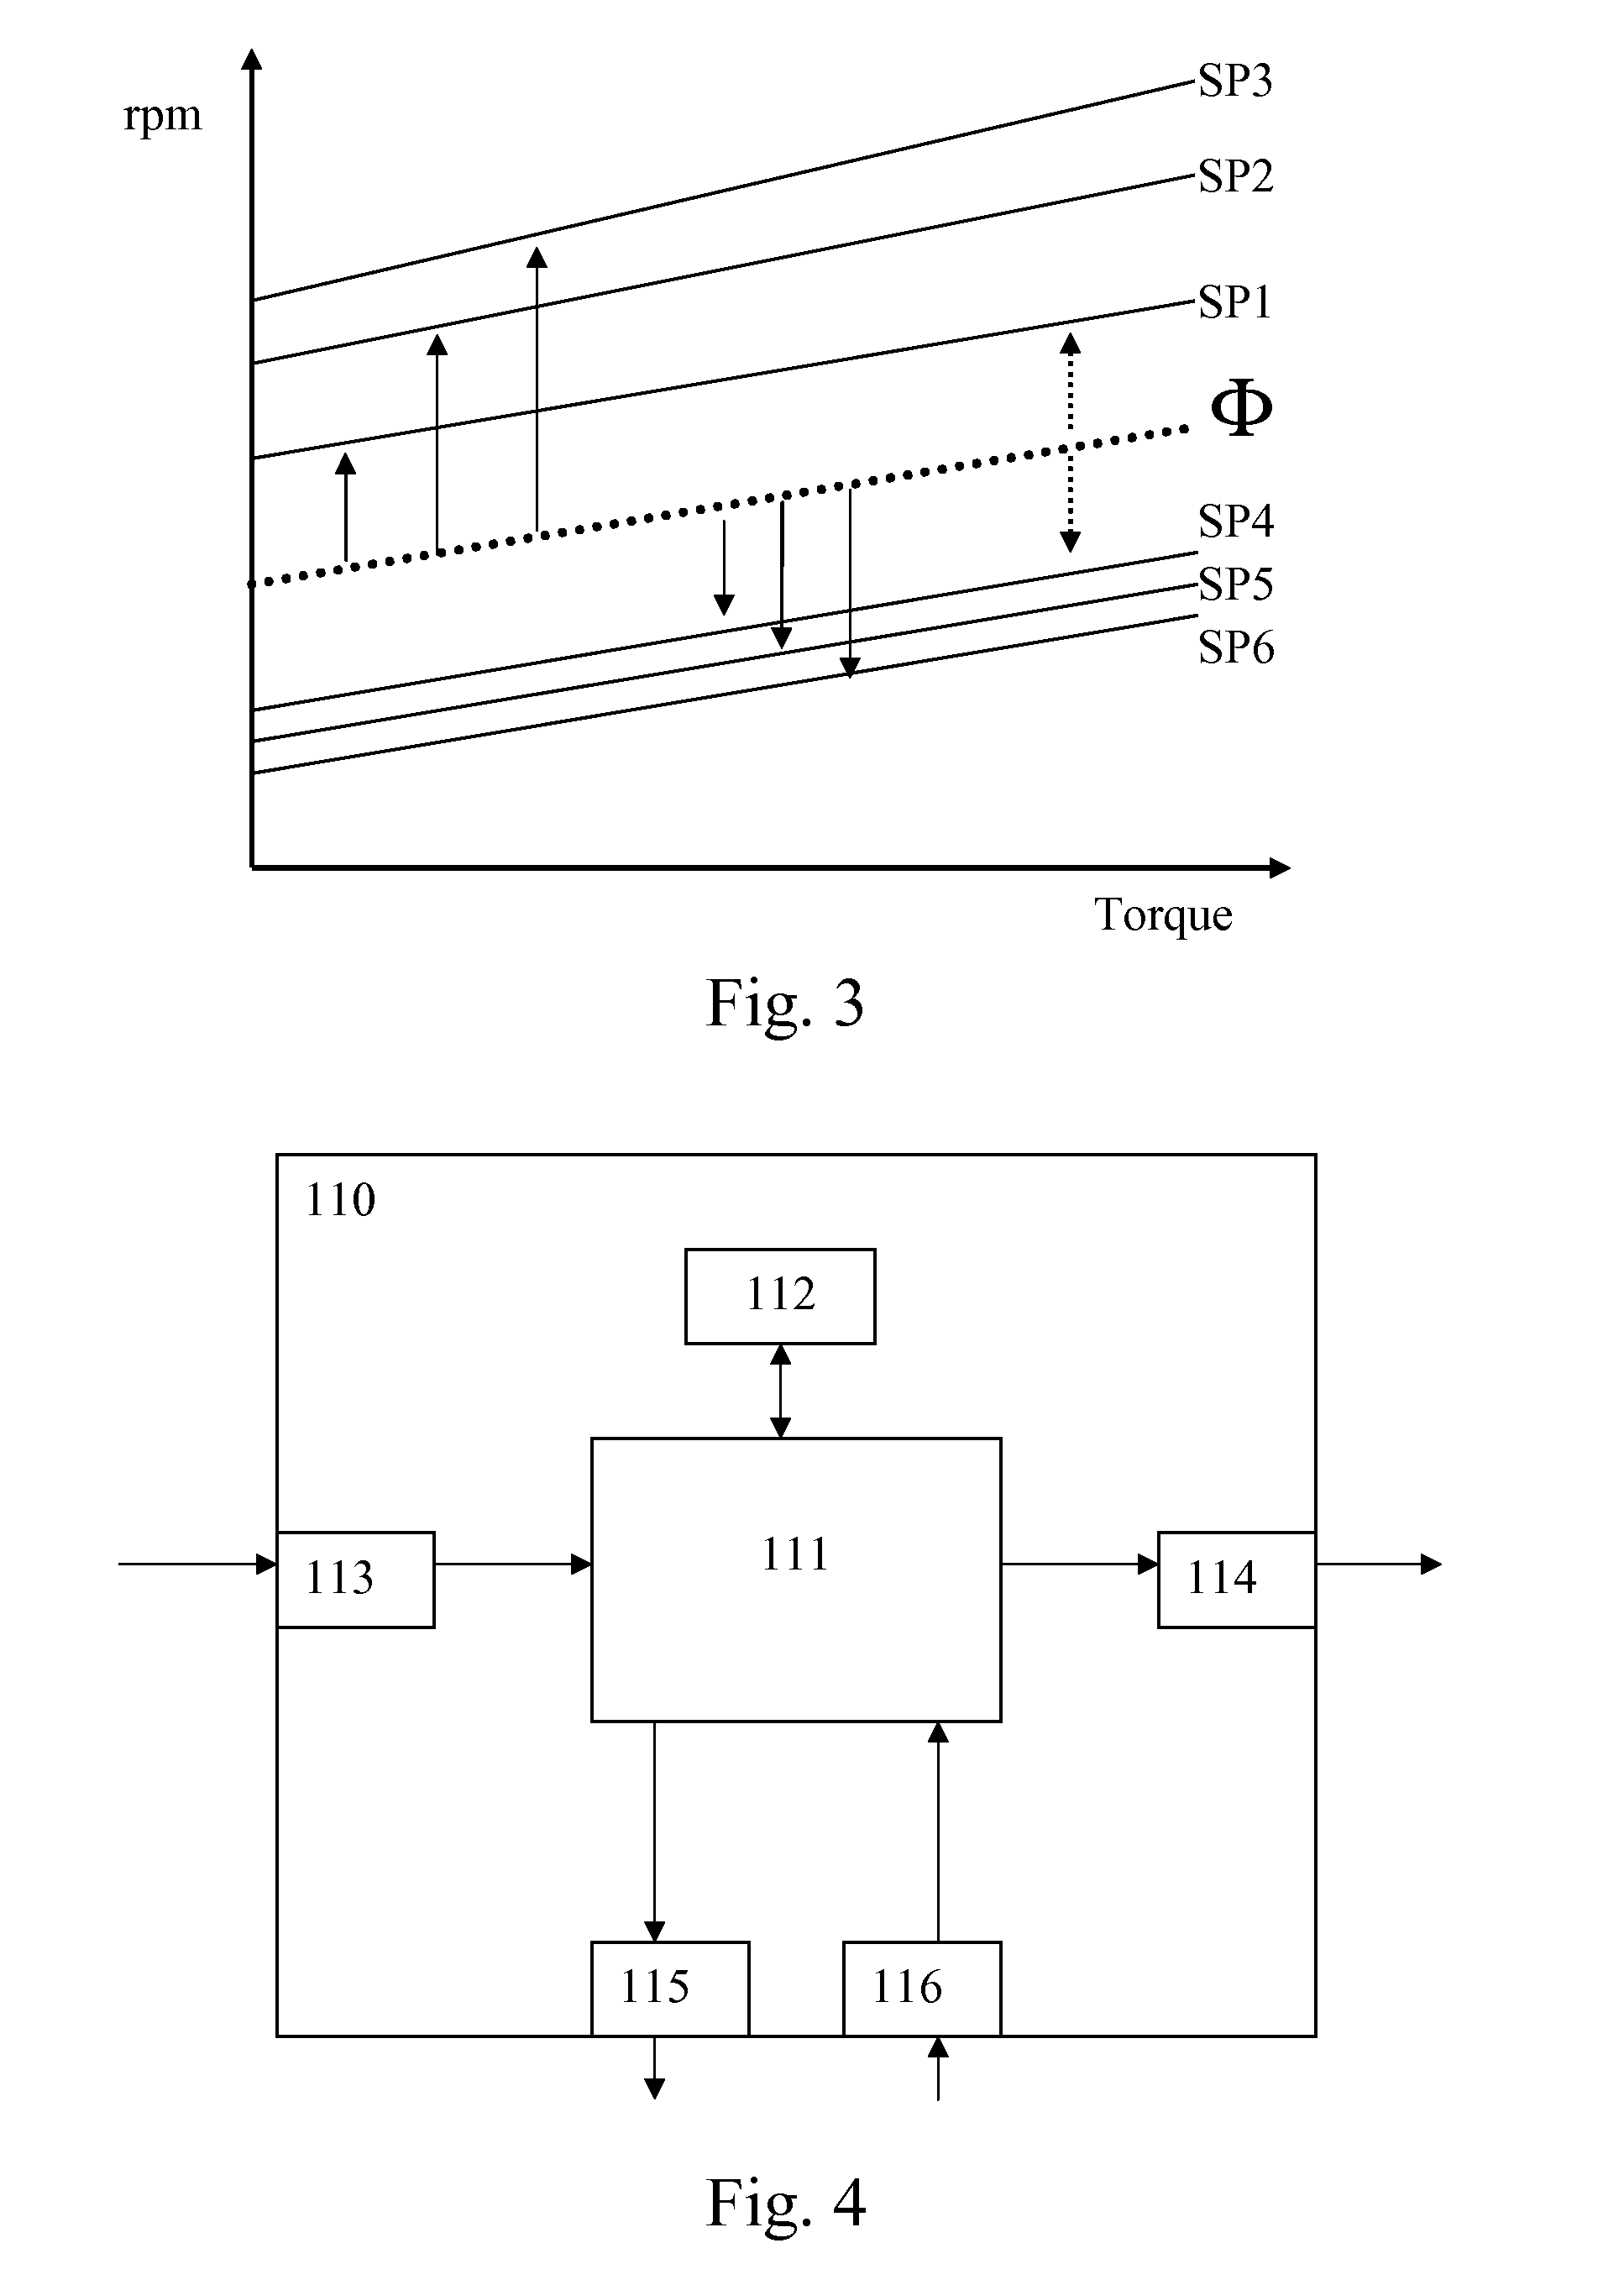 Method for determination of gearshift points